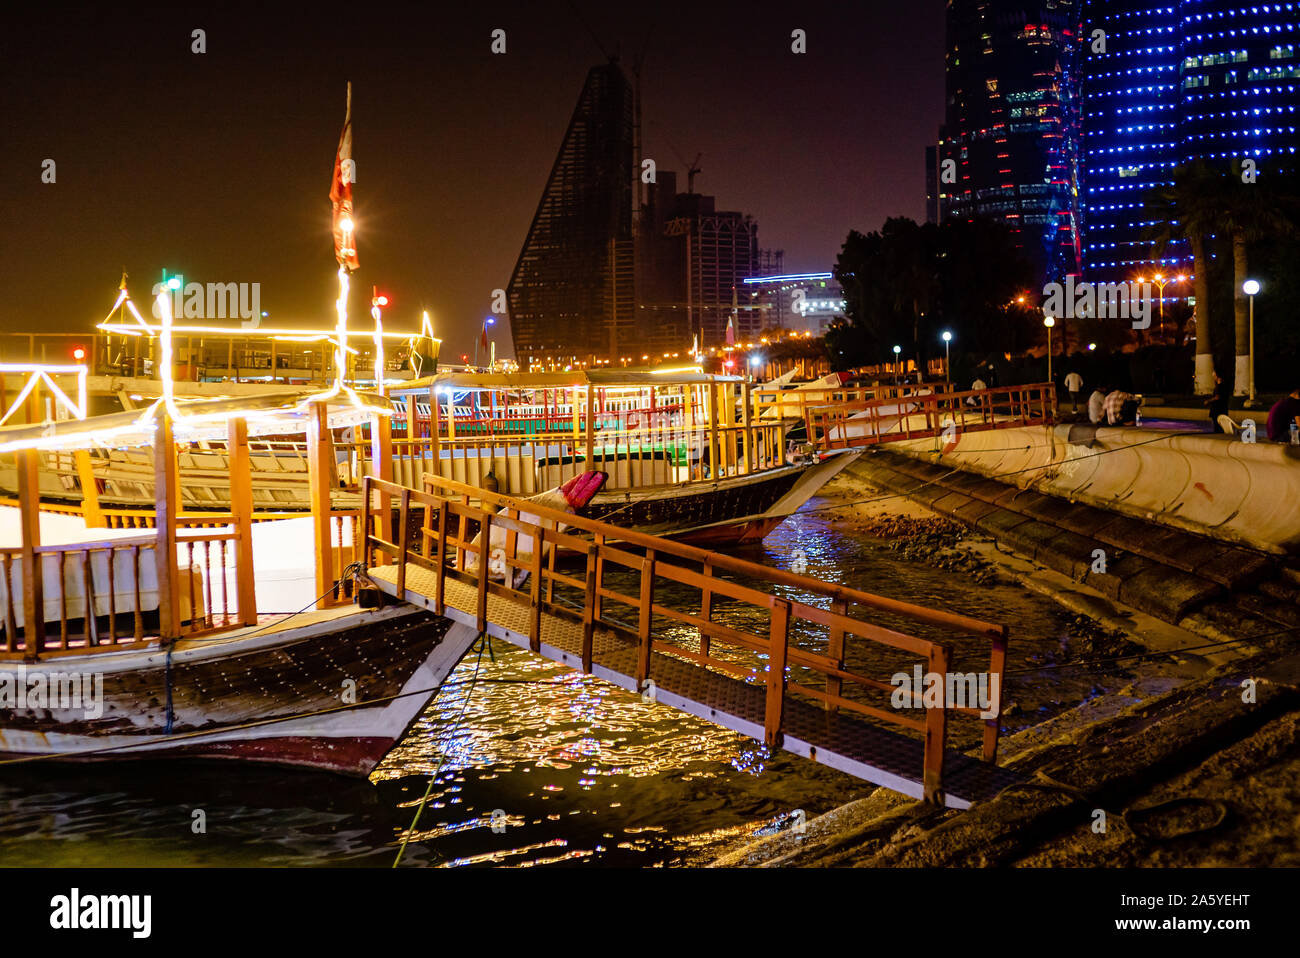 Wooden dhow boats, fitted with light strips, sit waiting for hire late in the evening on Doha's Corniche Stock Photo